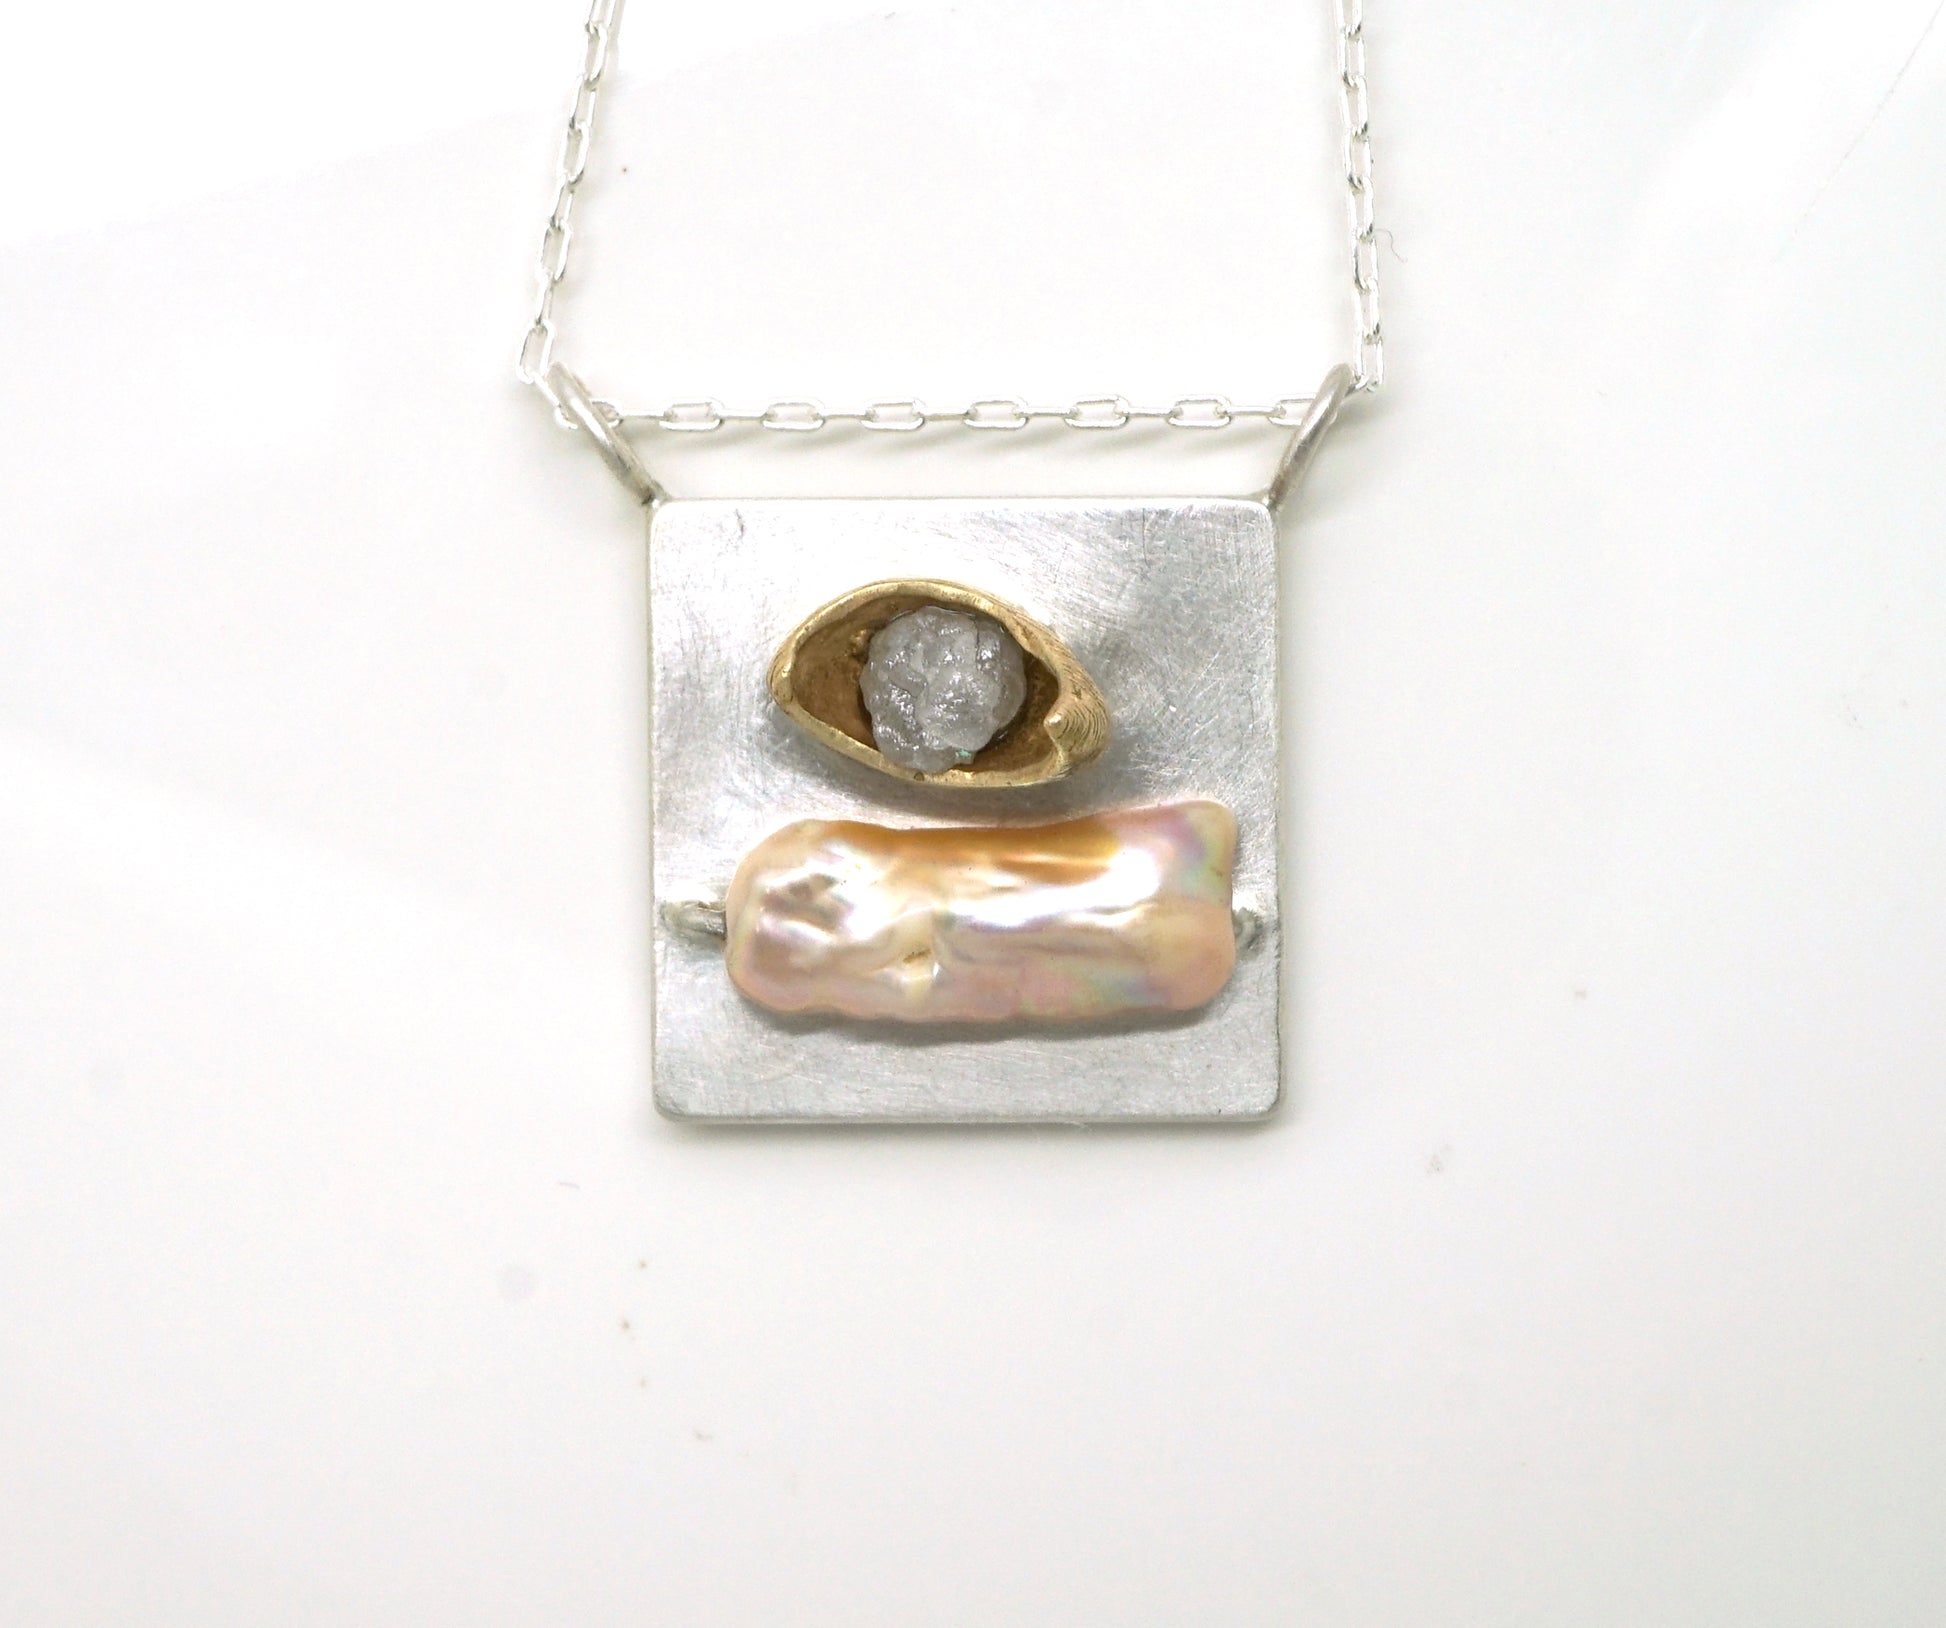 Art pendant necklace with raw diamond and pearl